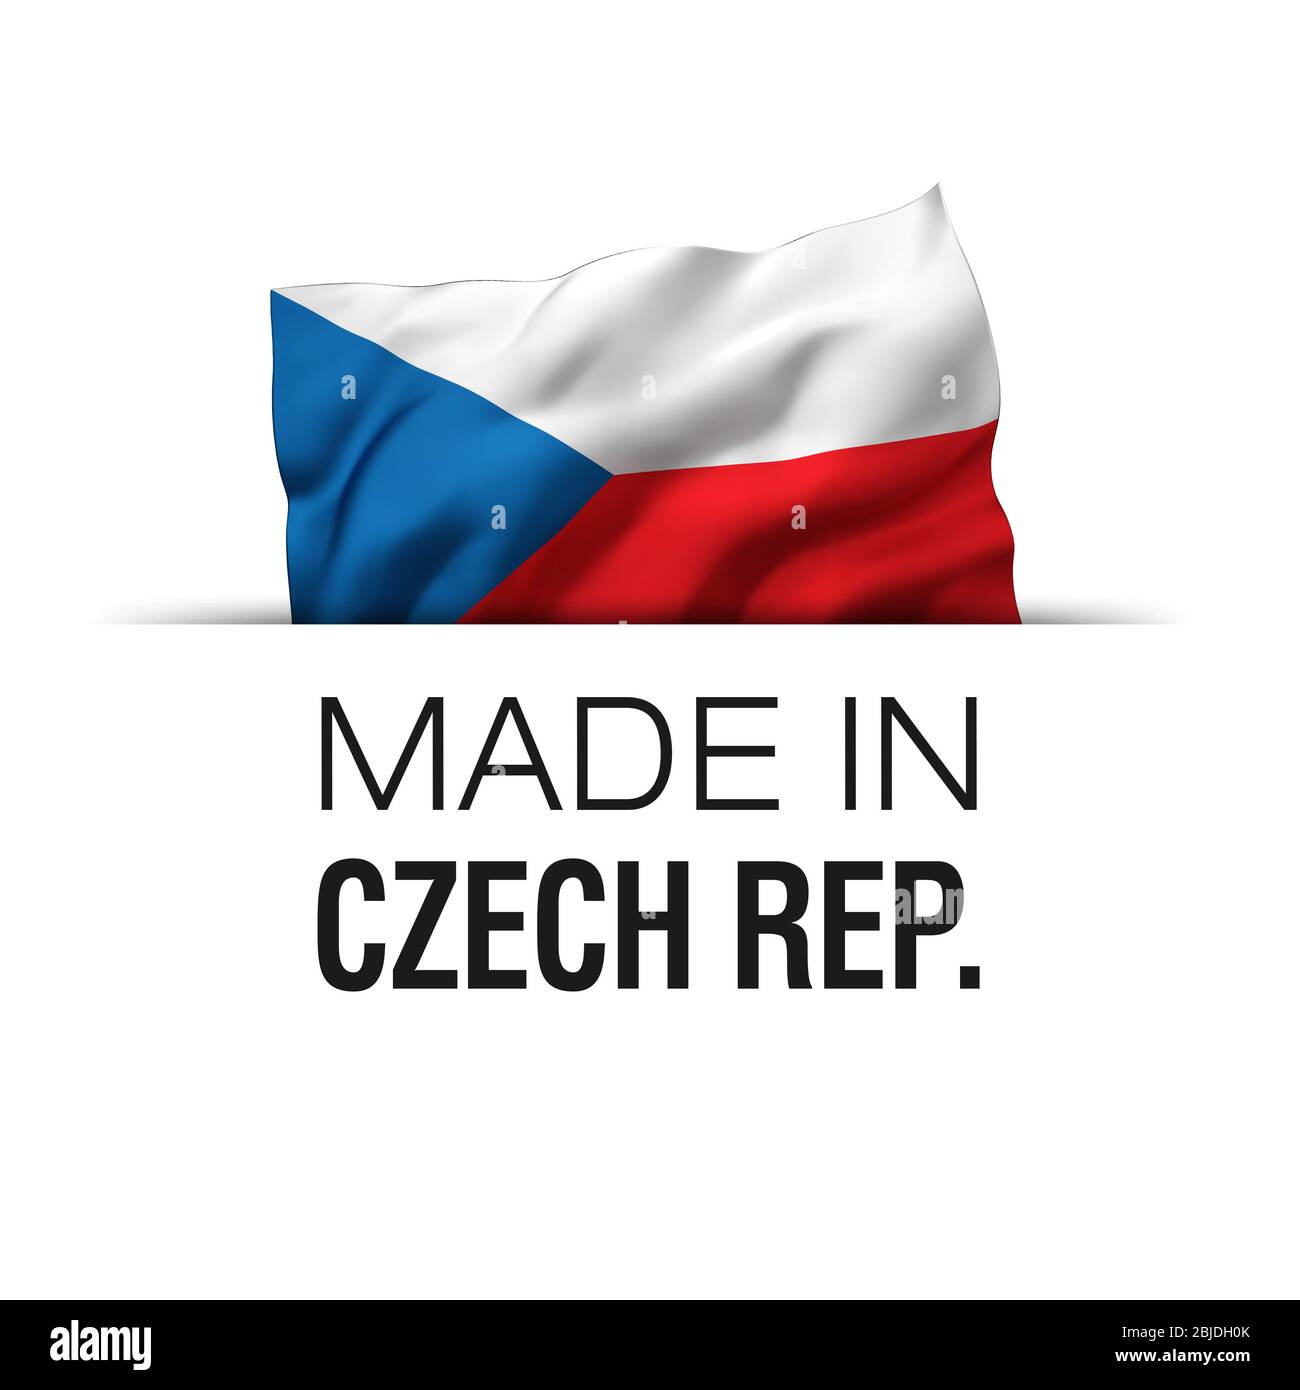 Made in Czech Republic - Guarantee label with a waving Czech flag. Stock Photo